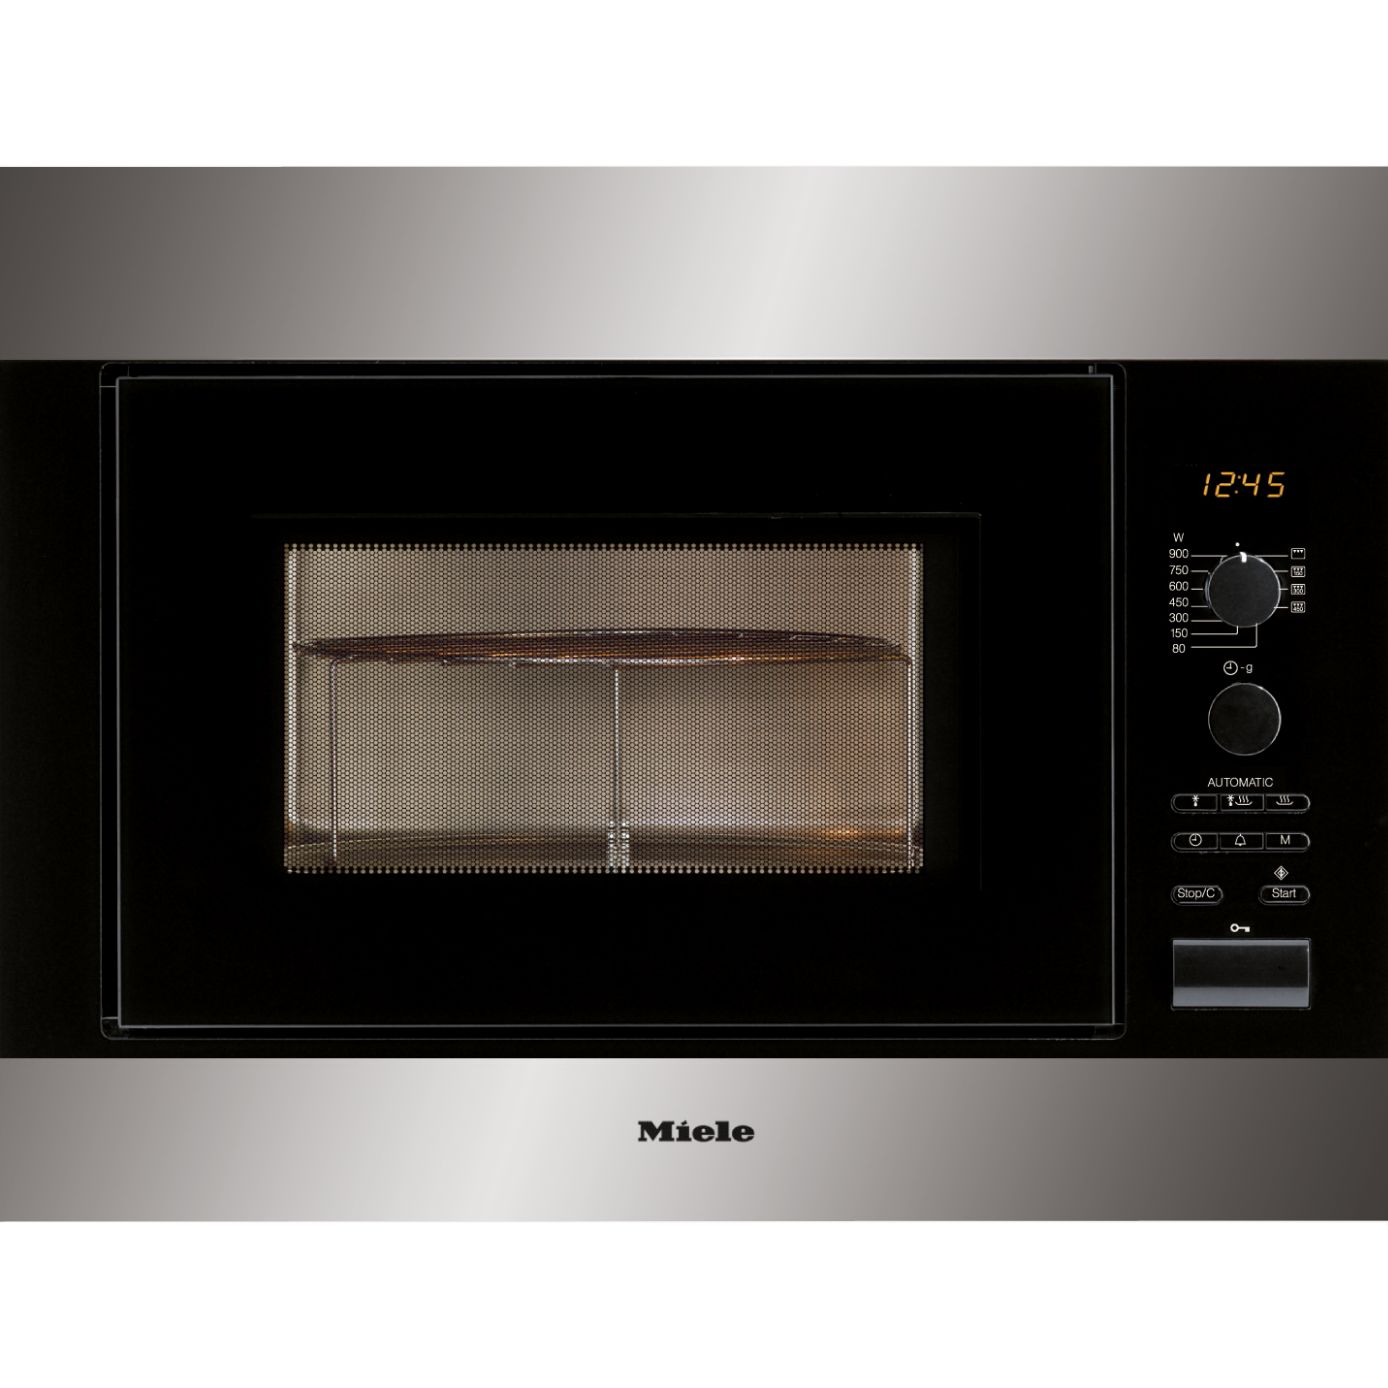 Miele M8261-2 Built-in Microwave, Stainless Steel at John Lewis